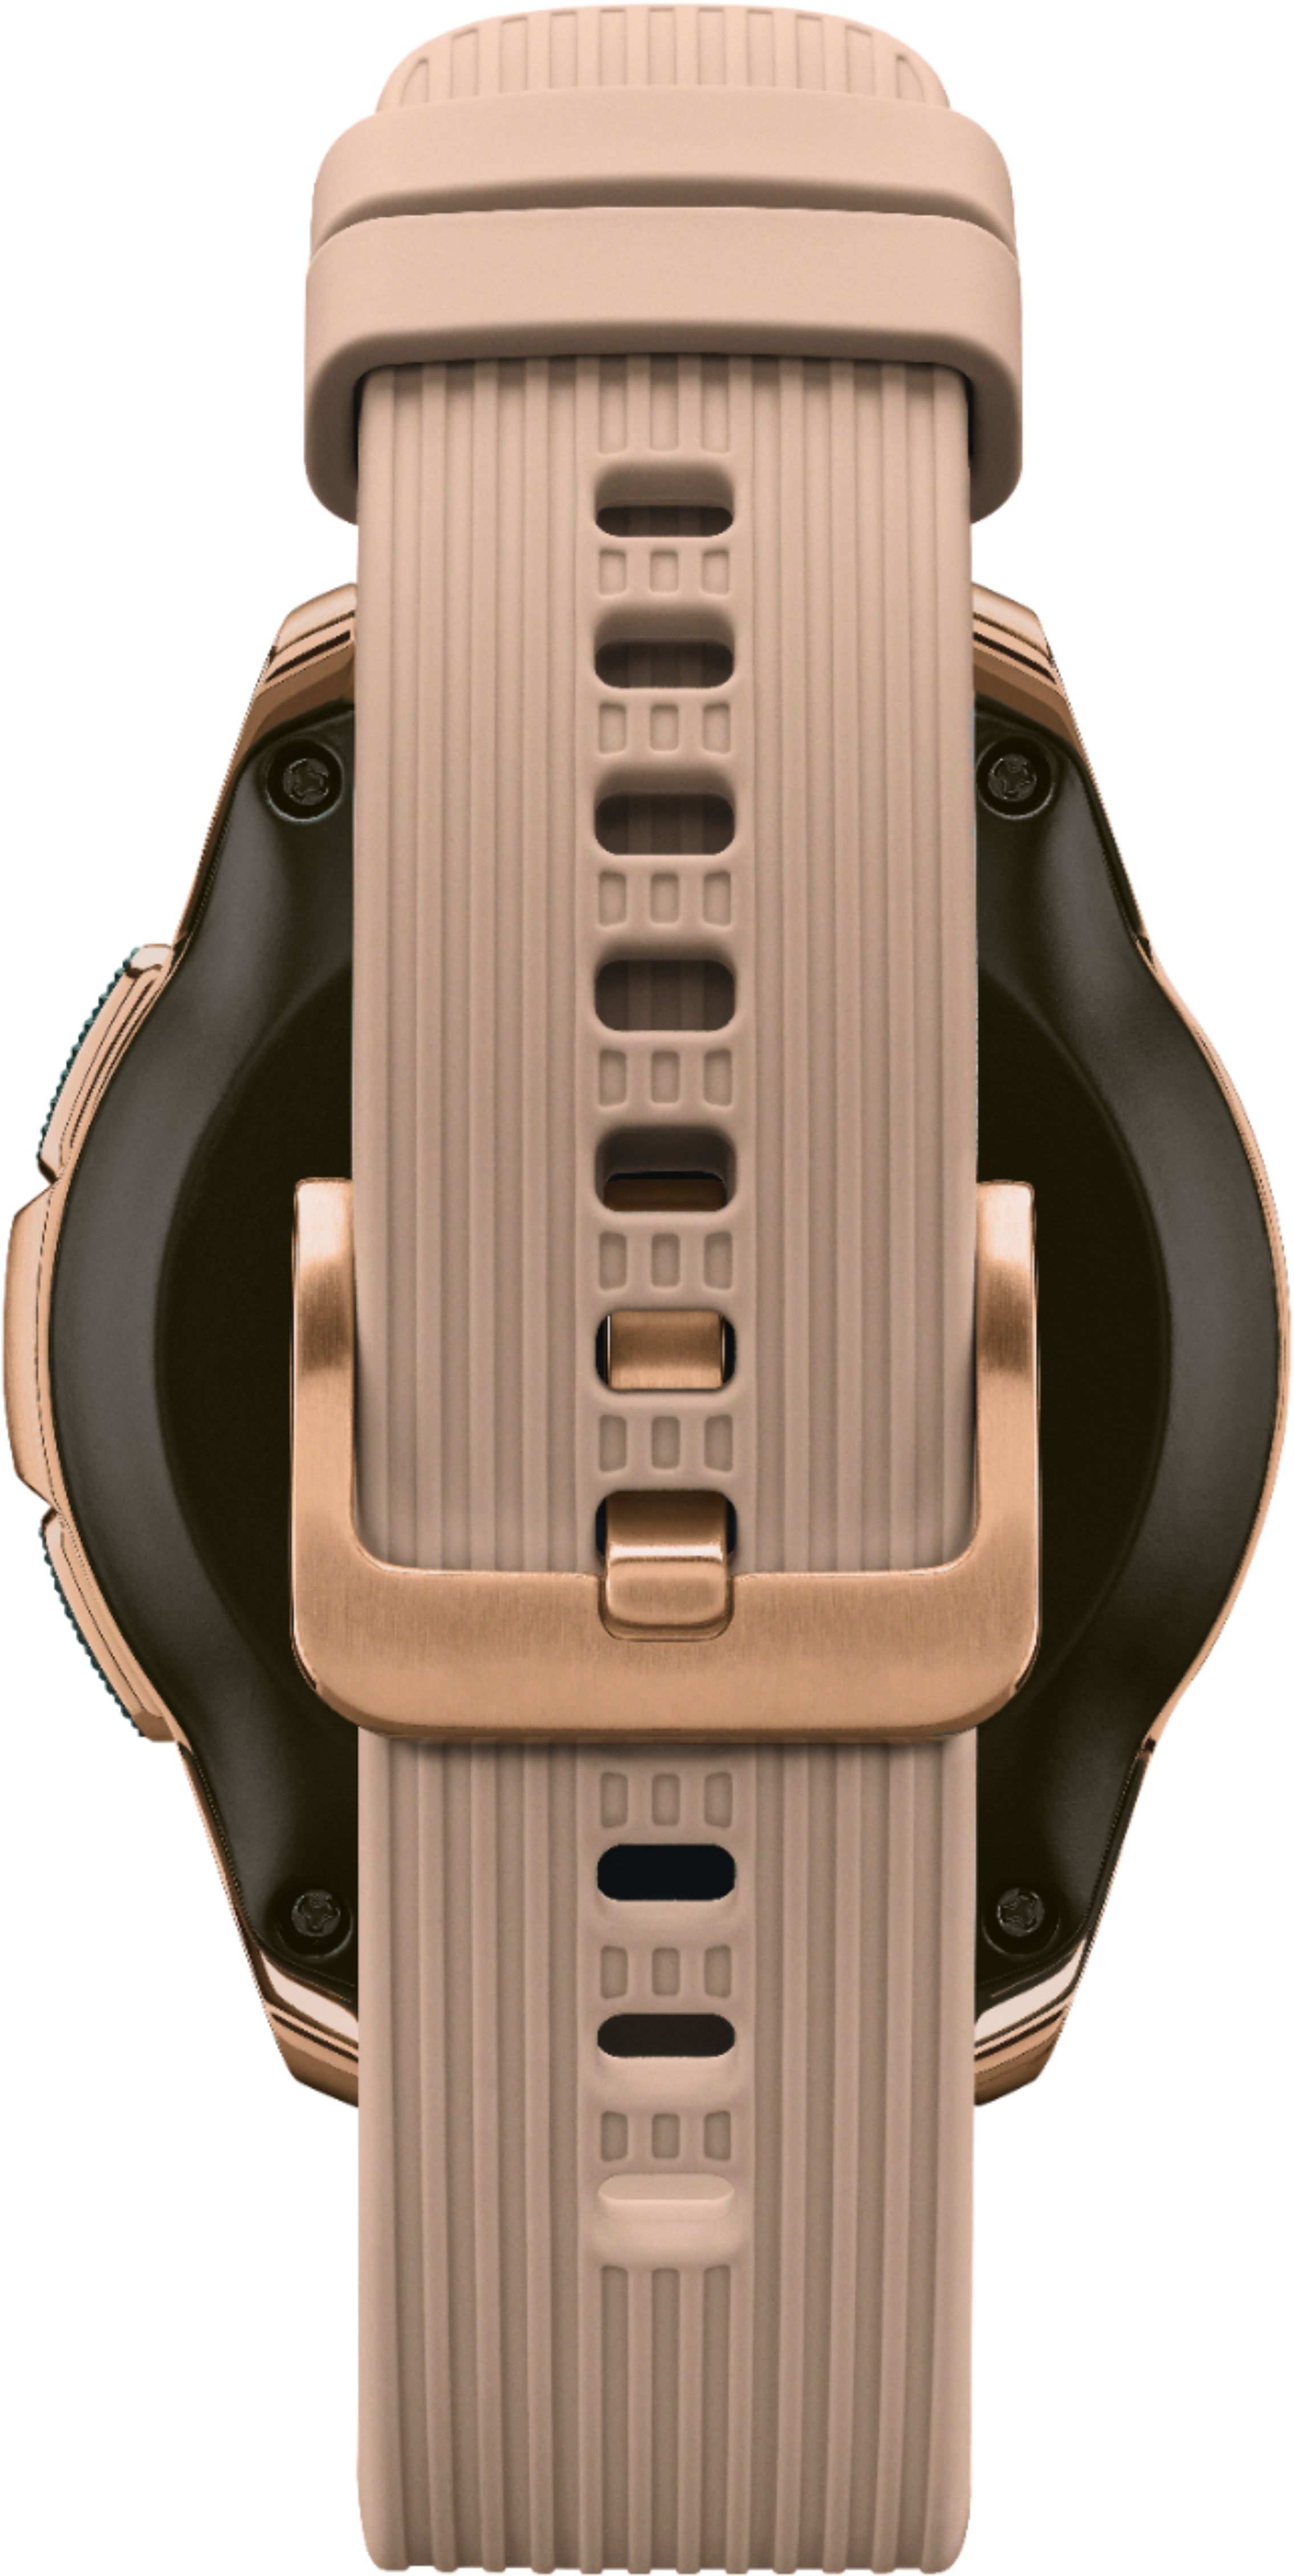 Back View: Samsung - Geek Squad Certified Refurbished Galaxy Watch Smartwatch 42mm Stainless Steel - Rose Gold